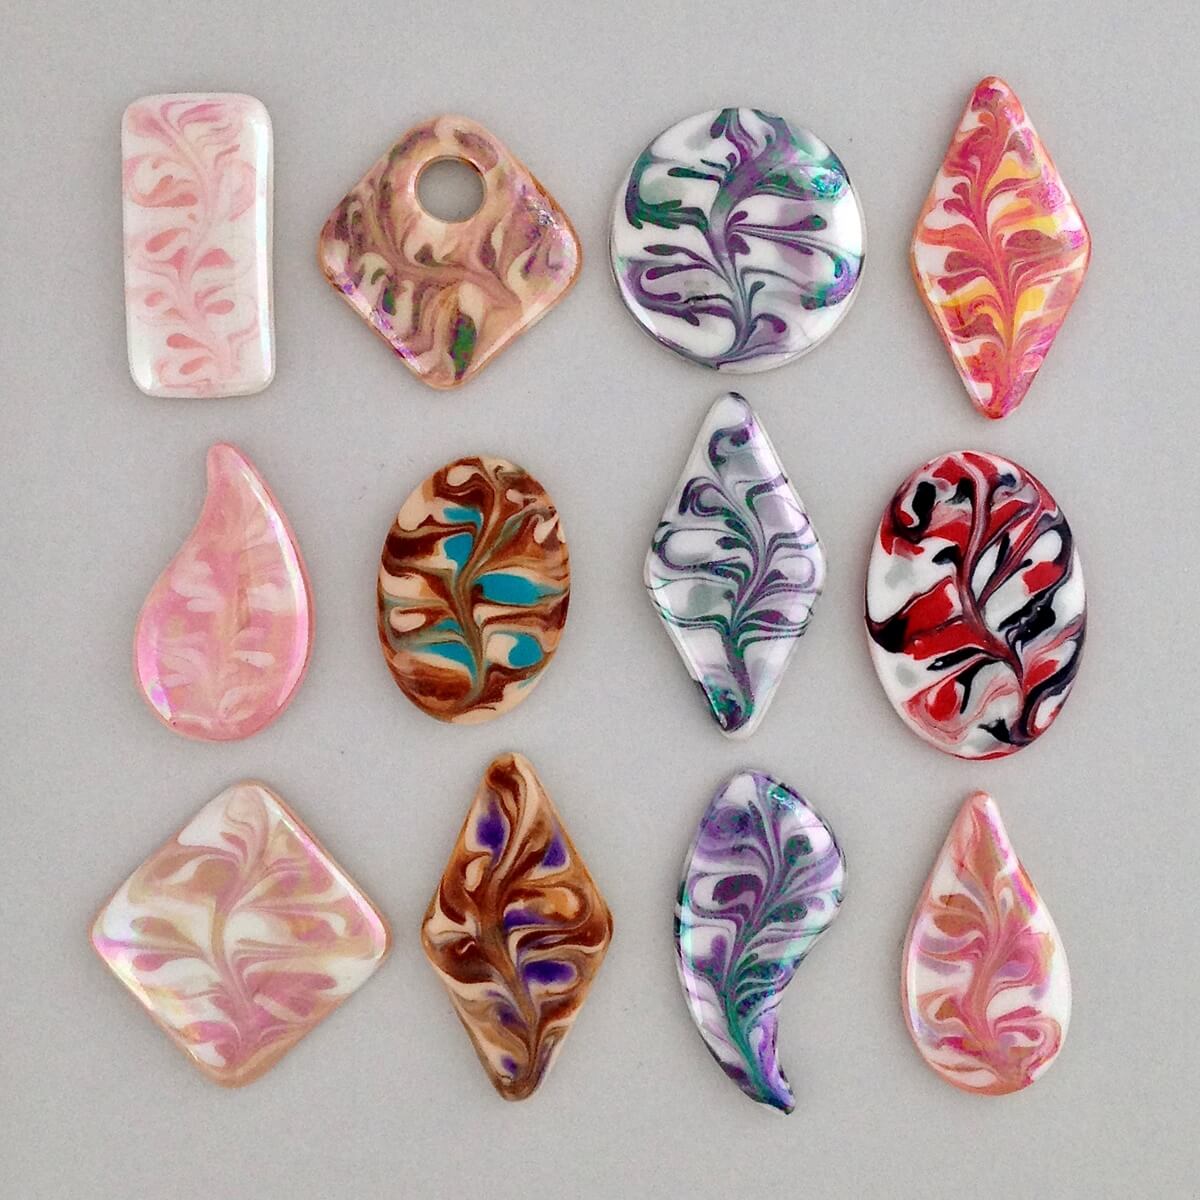 Porcelain cabochons for your wire or beading designs.